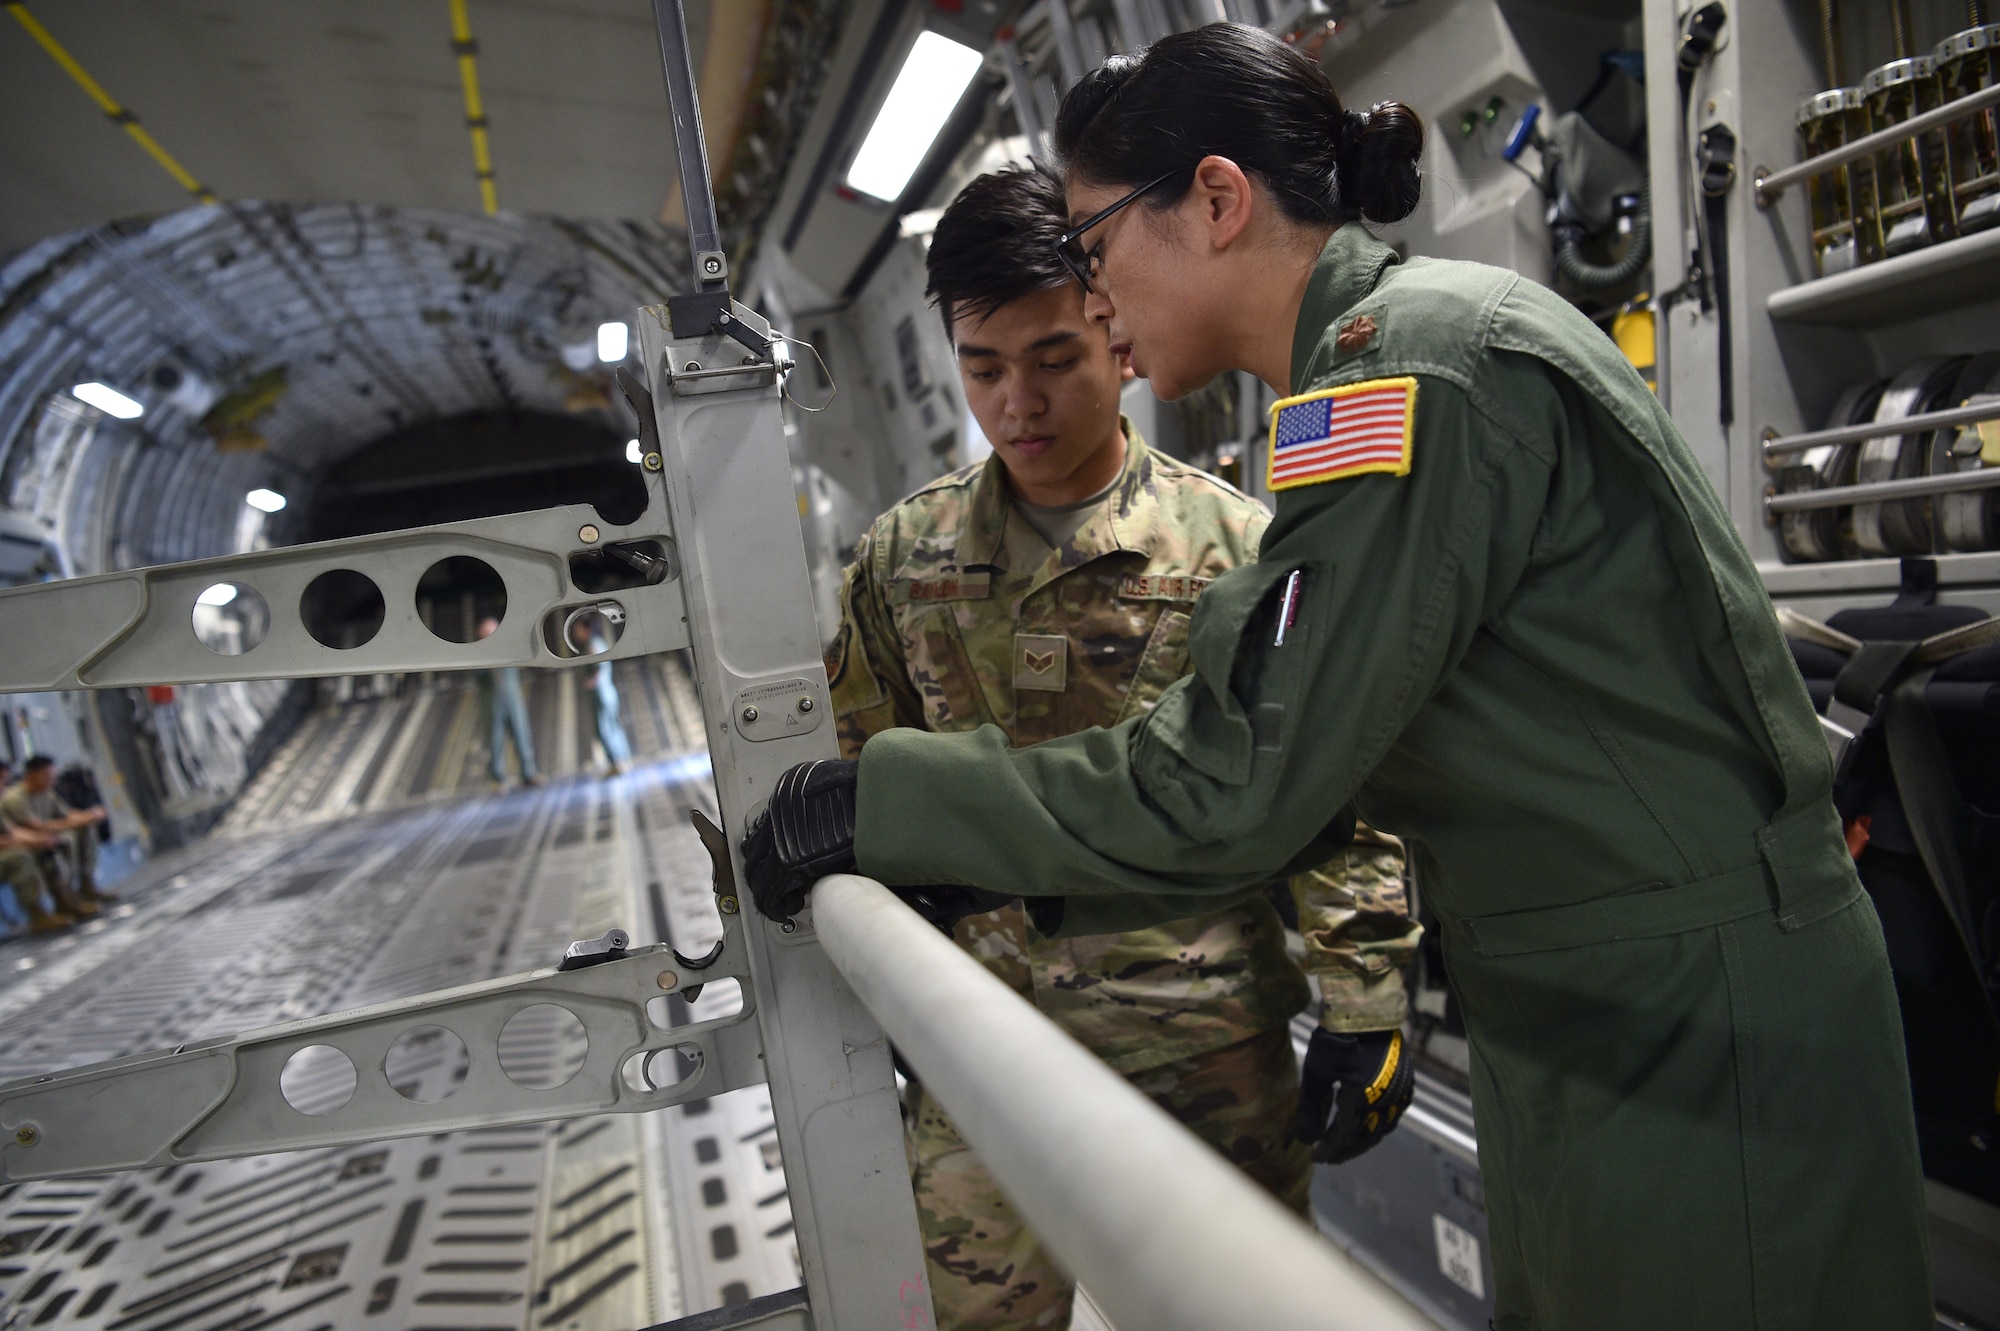 Senior Airman Ramel Baylon, 624th Civil Engineer Squadron, and Maj. Jeanette Williford, 613th Air Operations Center, prepare a C-17 for an aeromedical evacuation demonstration at Joint Base Pearl Harbor-Hickam, Hawaii, May 25, 2021. In honor of Asian American Pacific Islander Heritage Month, active duty, Air Force Reserve, and Air National Guard Airmen of Asian American and Pacific Islander descent came together to demonstrate Air Force capabilities for University of Hawaii ROTC cadets. (U.S. Air Force photo by 1st Lt. Amber R. Kelly-Herard)